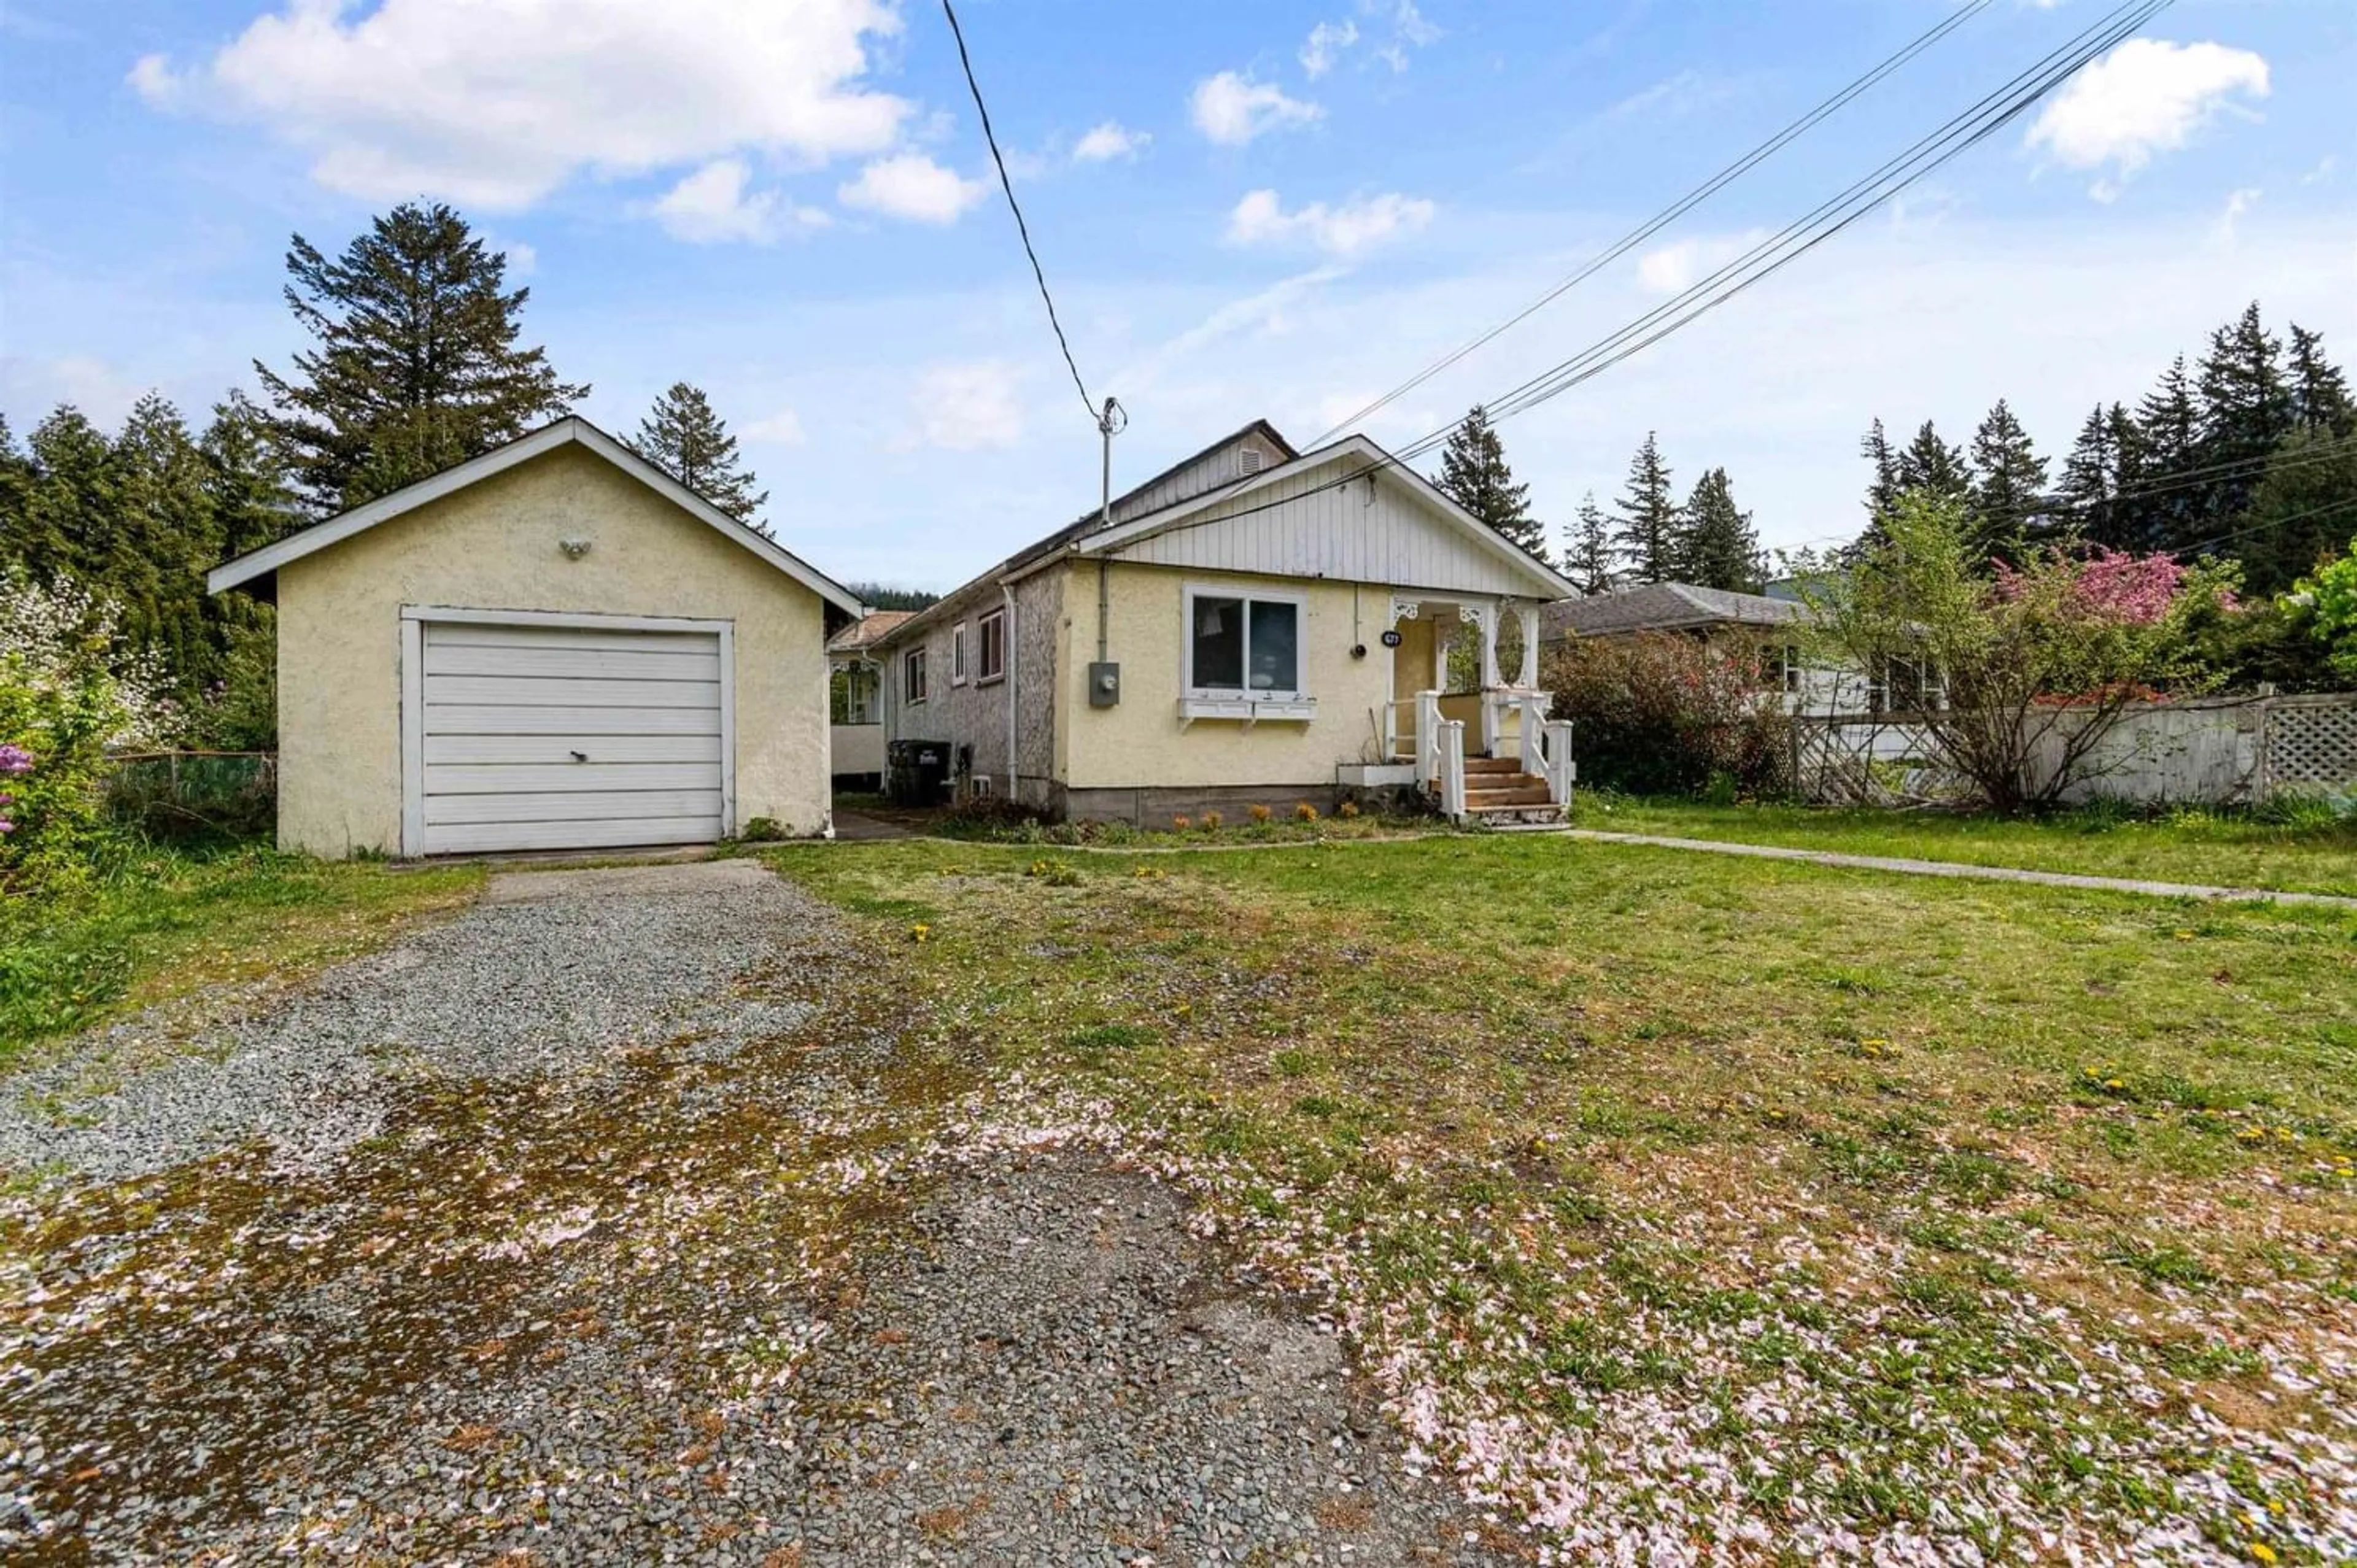 Cottage for 677 5TH AVENUE, Hope British Columbia V0X1L0